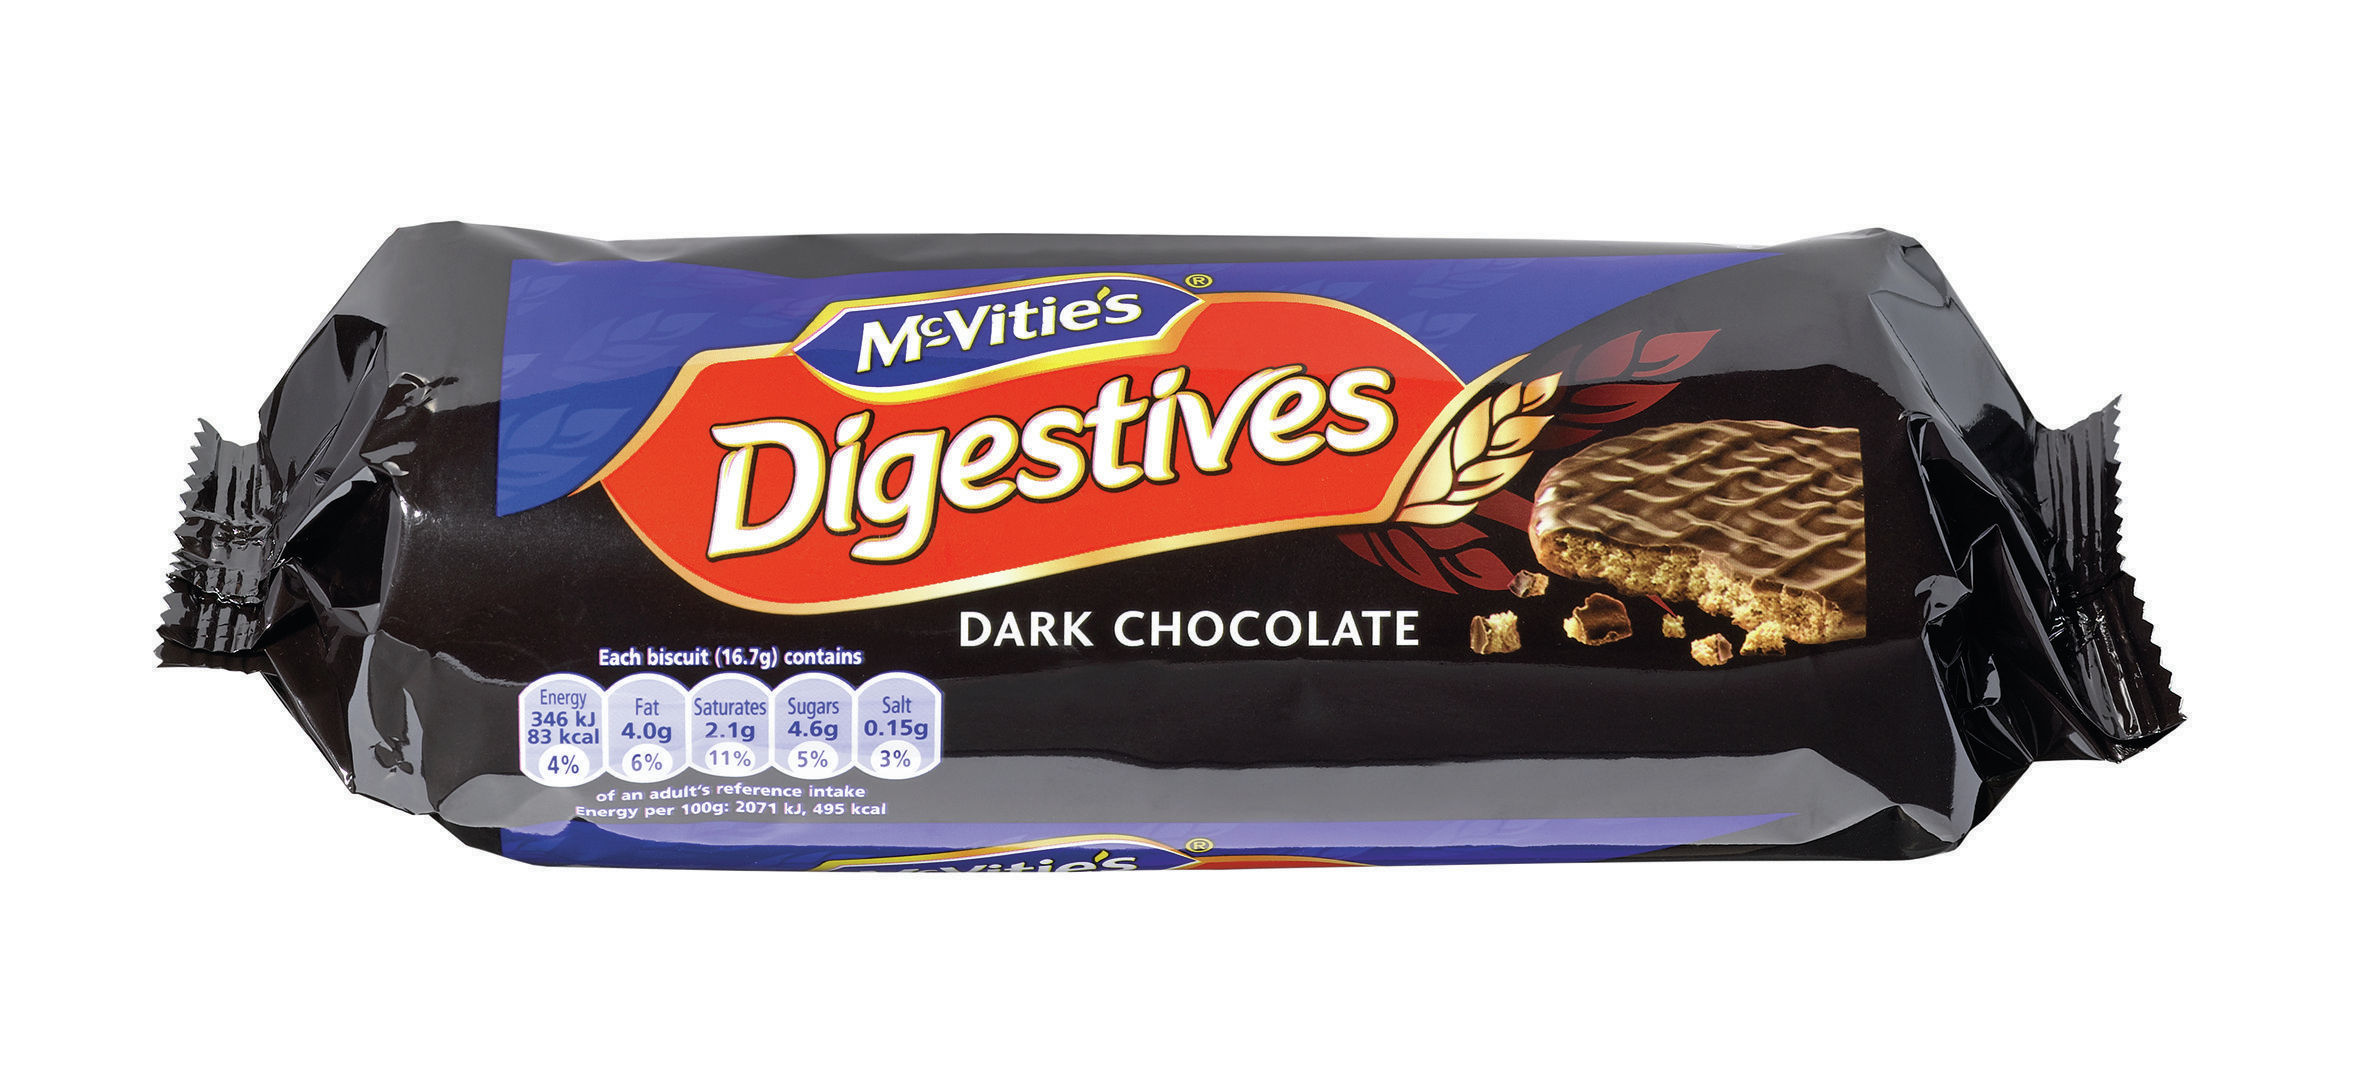 It's official, the chocolate digestive is the best biscuit!